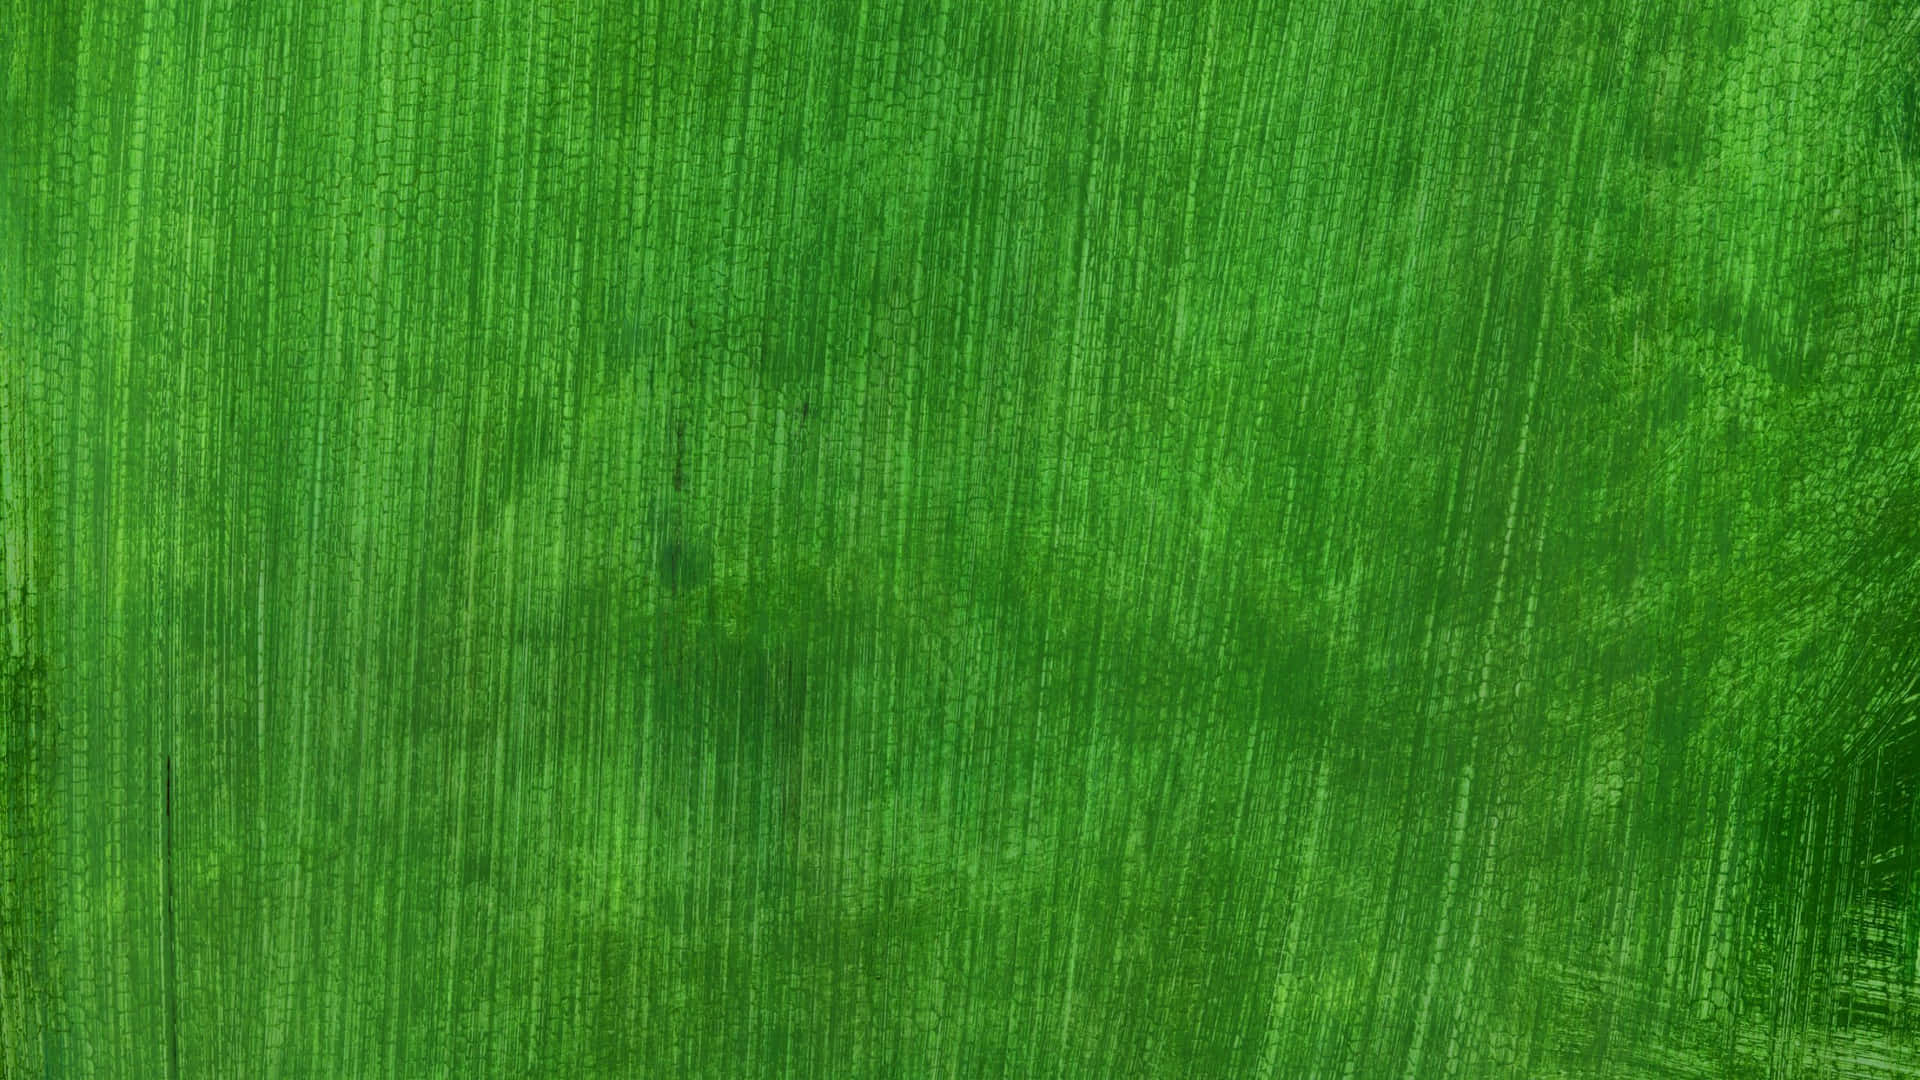 Give your room a pop of solid green with a unique wallpaper